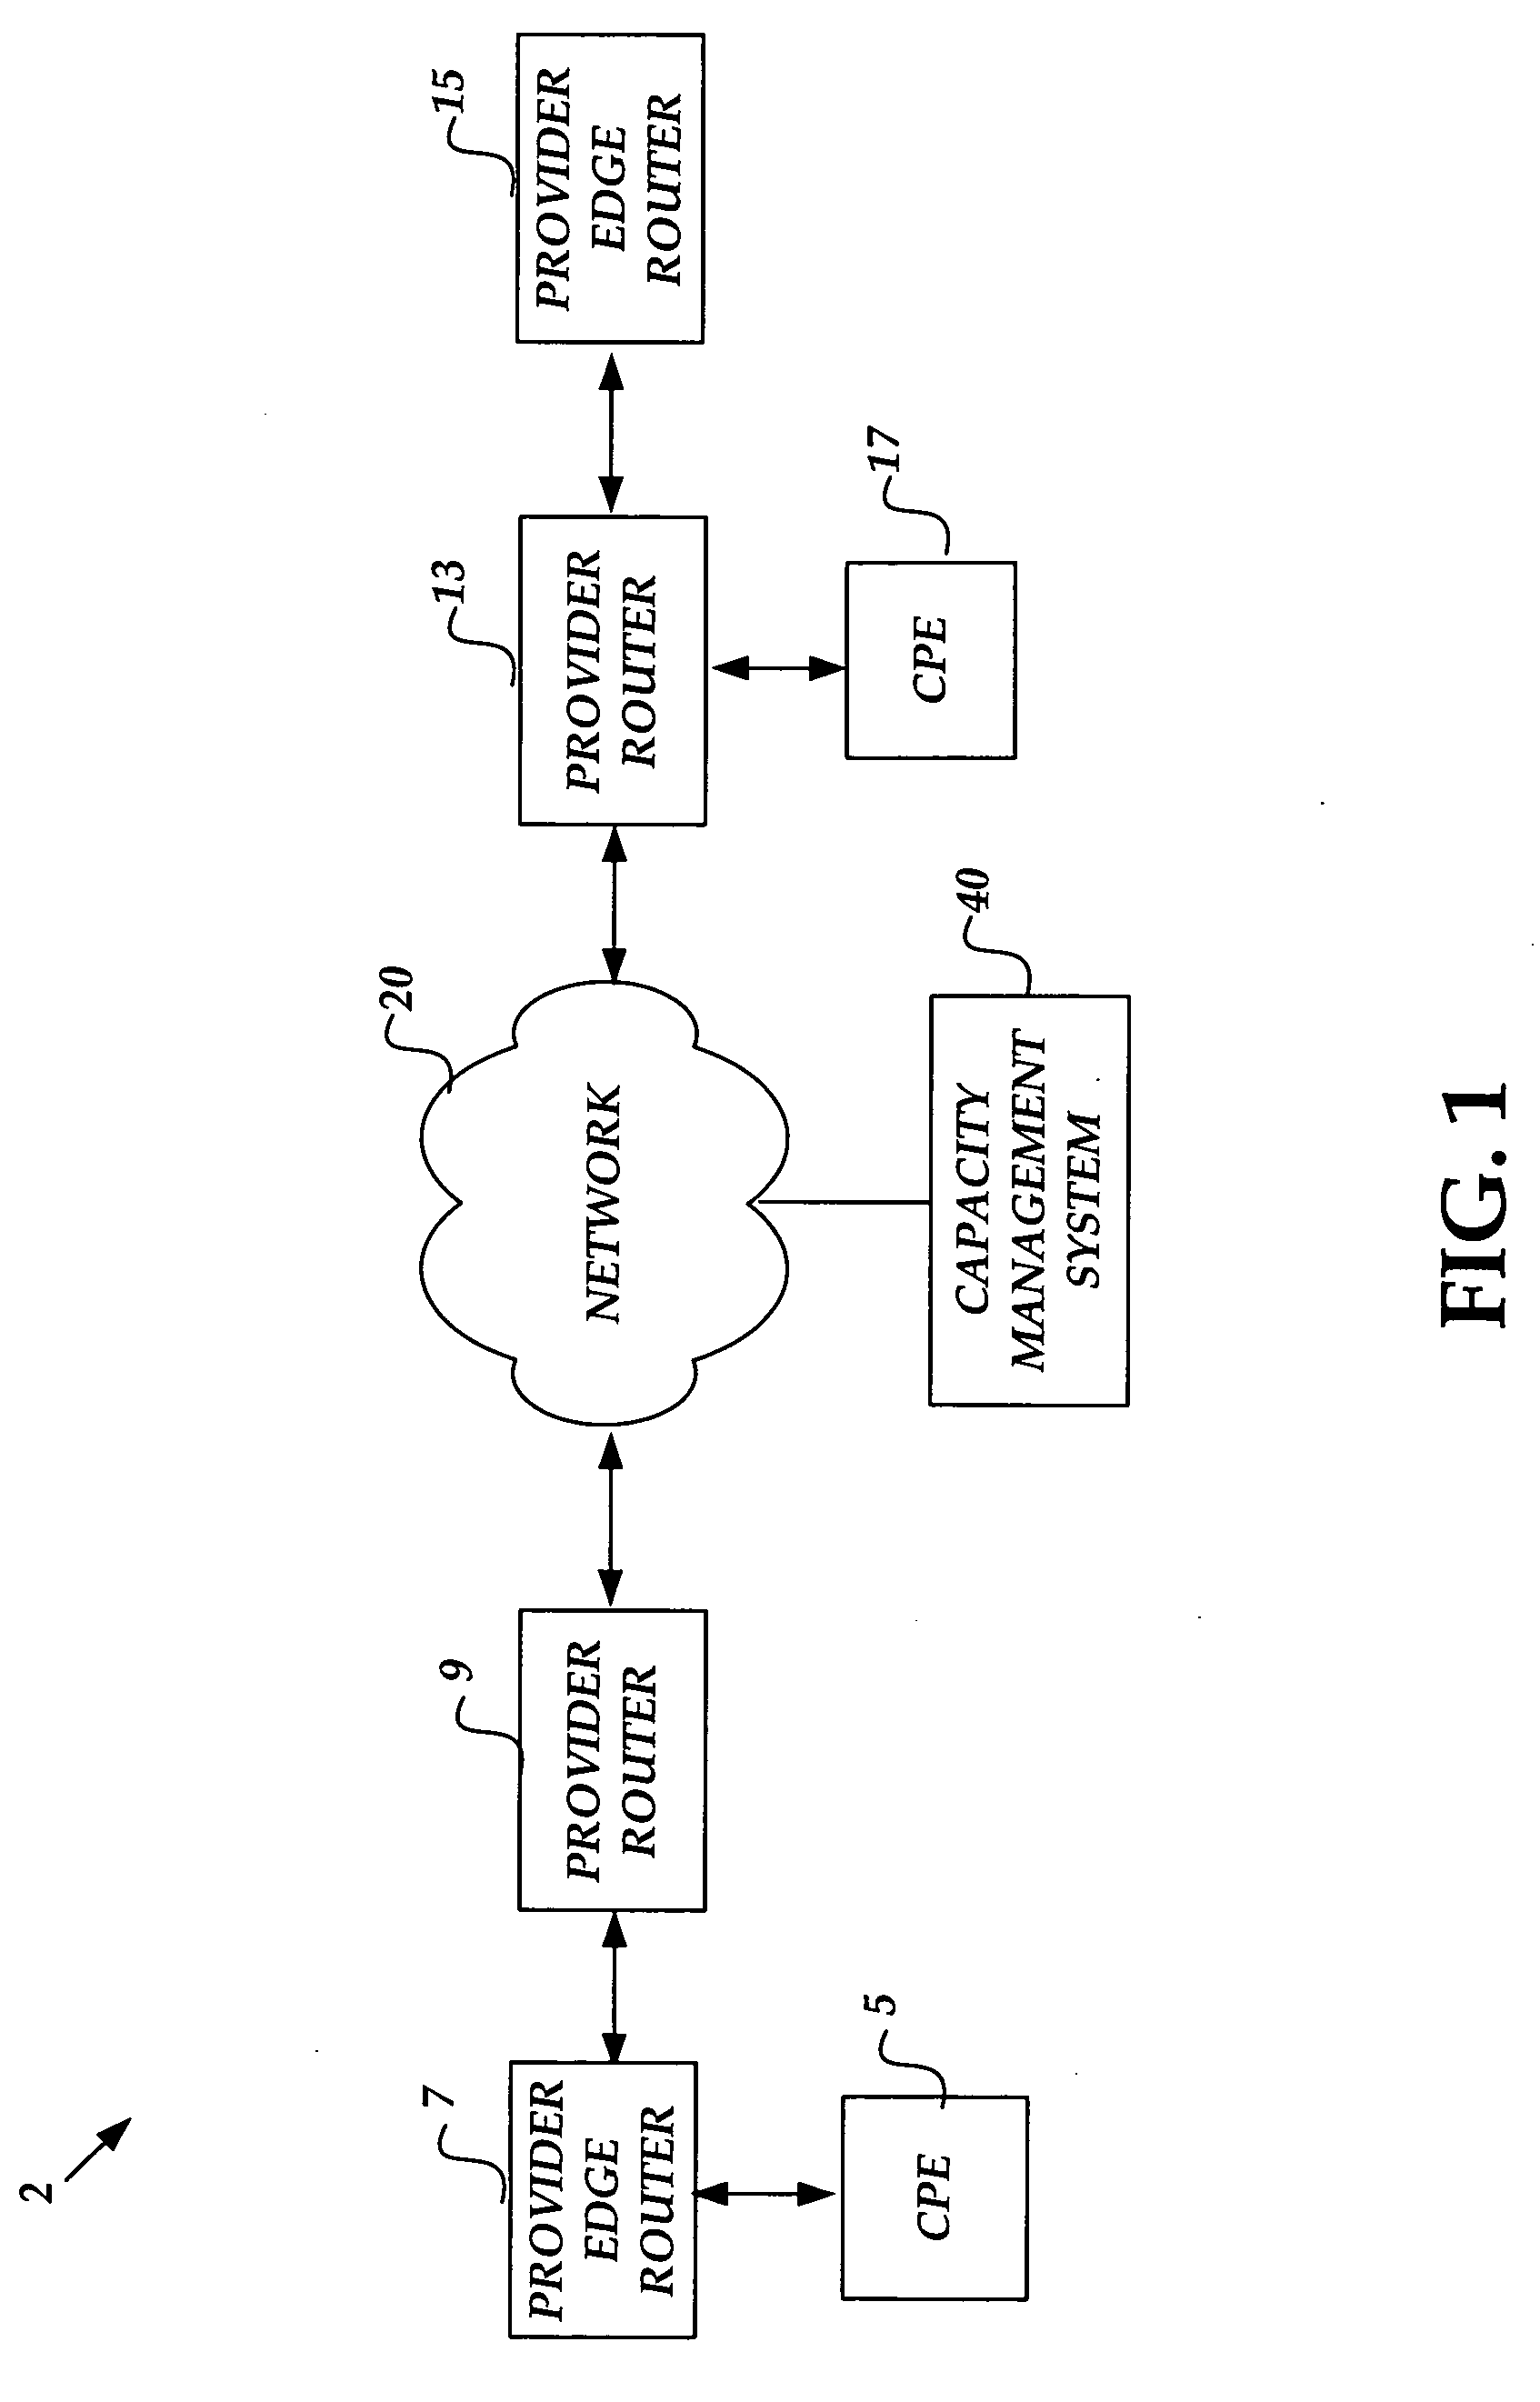 Methods and systems for developing a capacity management plan for implementing a network service in a data network